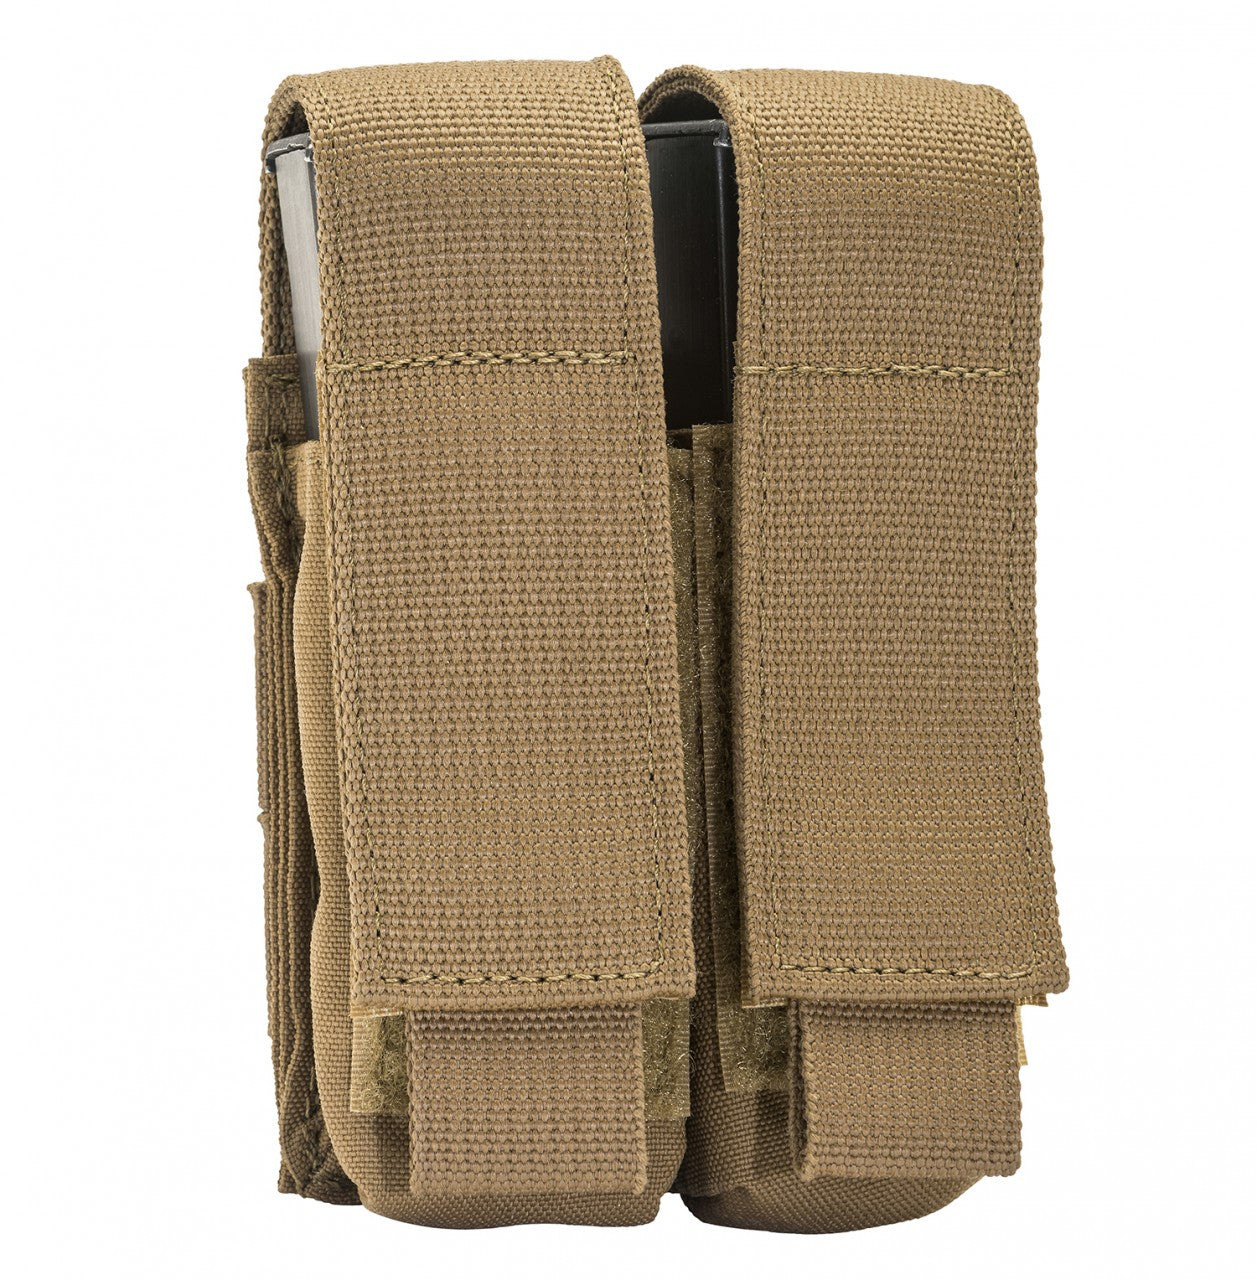 T3 Pistol Double Mag Pouch (2)